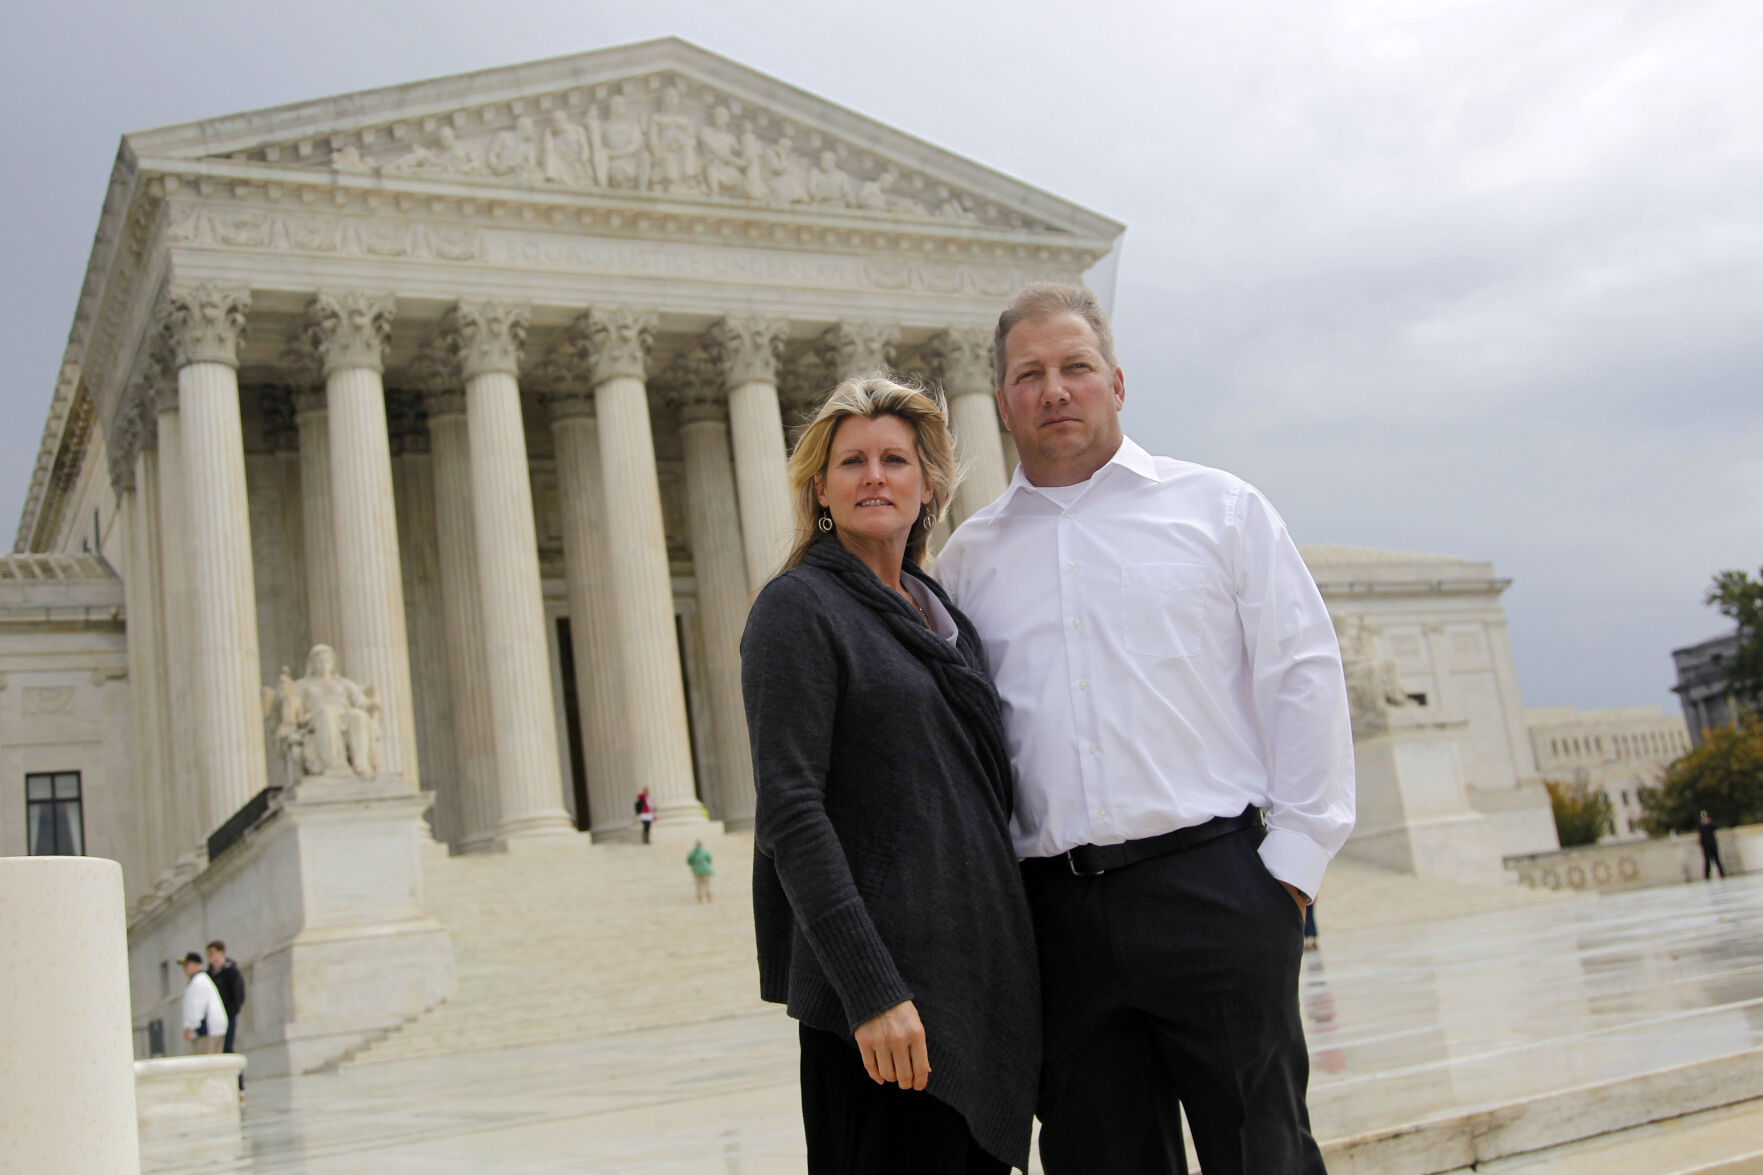 <p>FILE - Michael and Chantell Sackett of Priest Lake, Idaho, pose for a photo in front of the Supreme Court in Washington on Oct. 14, 2011. The Supreme Court on Thursday, May 25, 2023, made it harder for the federal government to police water pollution in a decision that strips protections from wetlands that are isolated from larger bodies of water. The justices boosted property rights over concerns about clean water in a ruling in favor of an Idaho couple who sought to build a house near Priest Lake in the state’s panhandle. (AP Photo/Haraz N. Ghanbari, File)</p>   PHOTO CREDIT: Haraz N. Ghanbari 